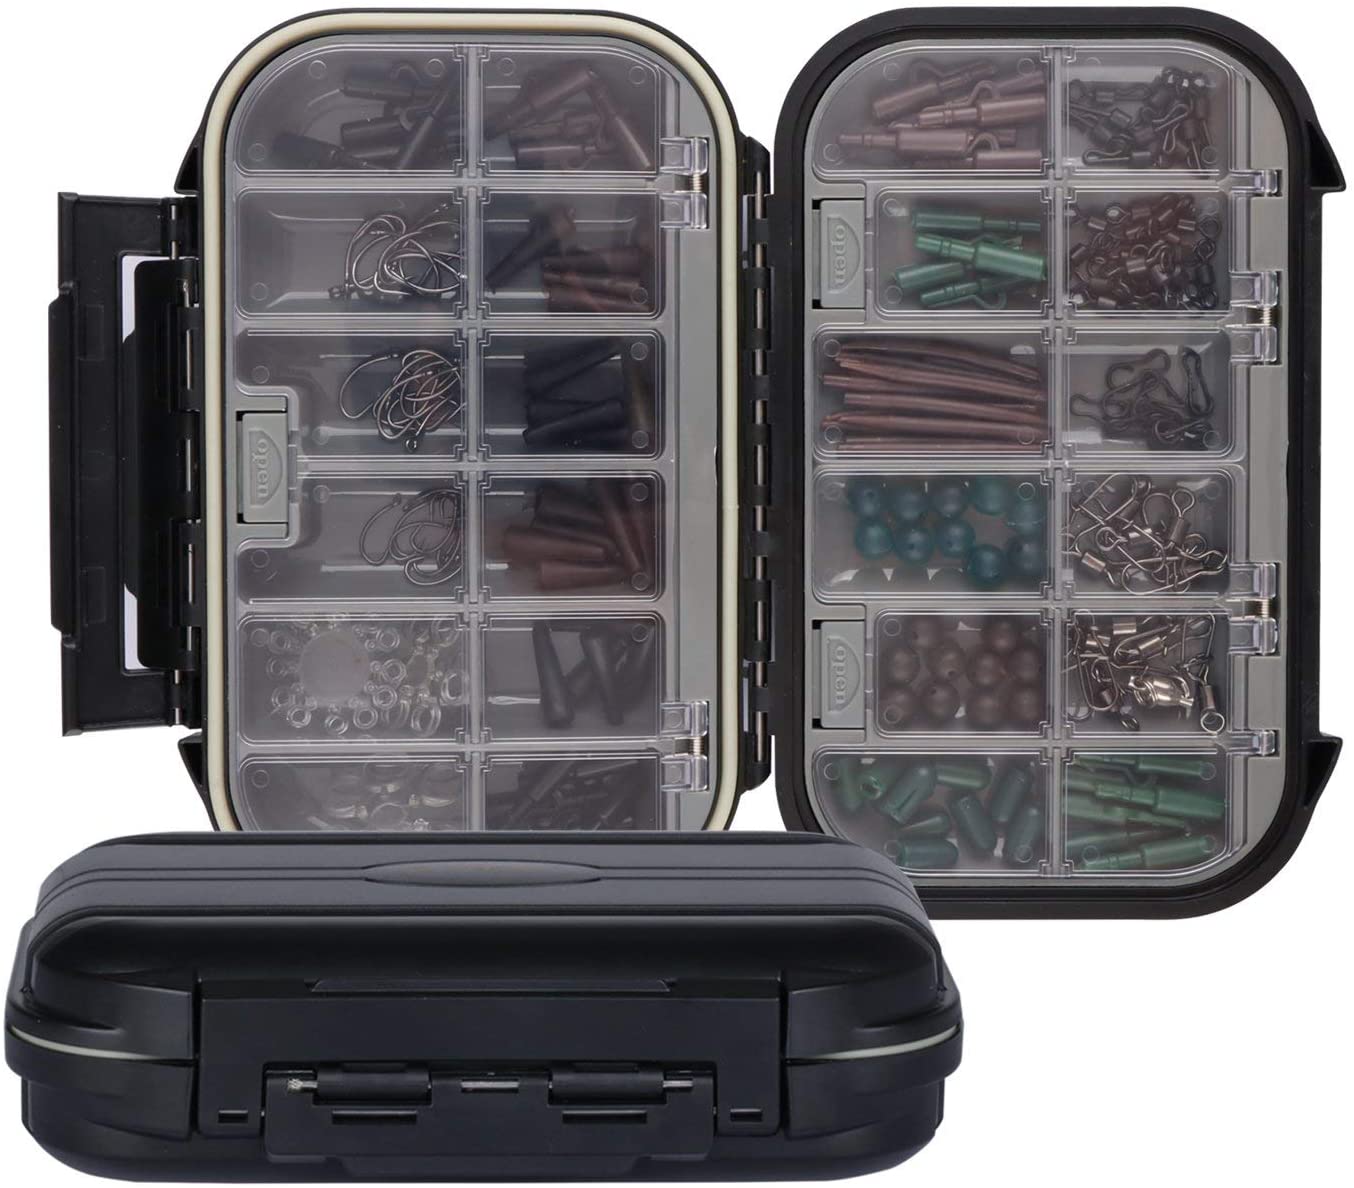 Etereauty Box Fishing Bait Tackle Box Case Small Lures Lure